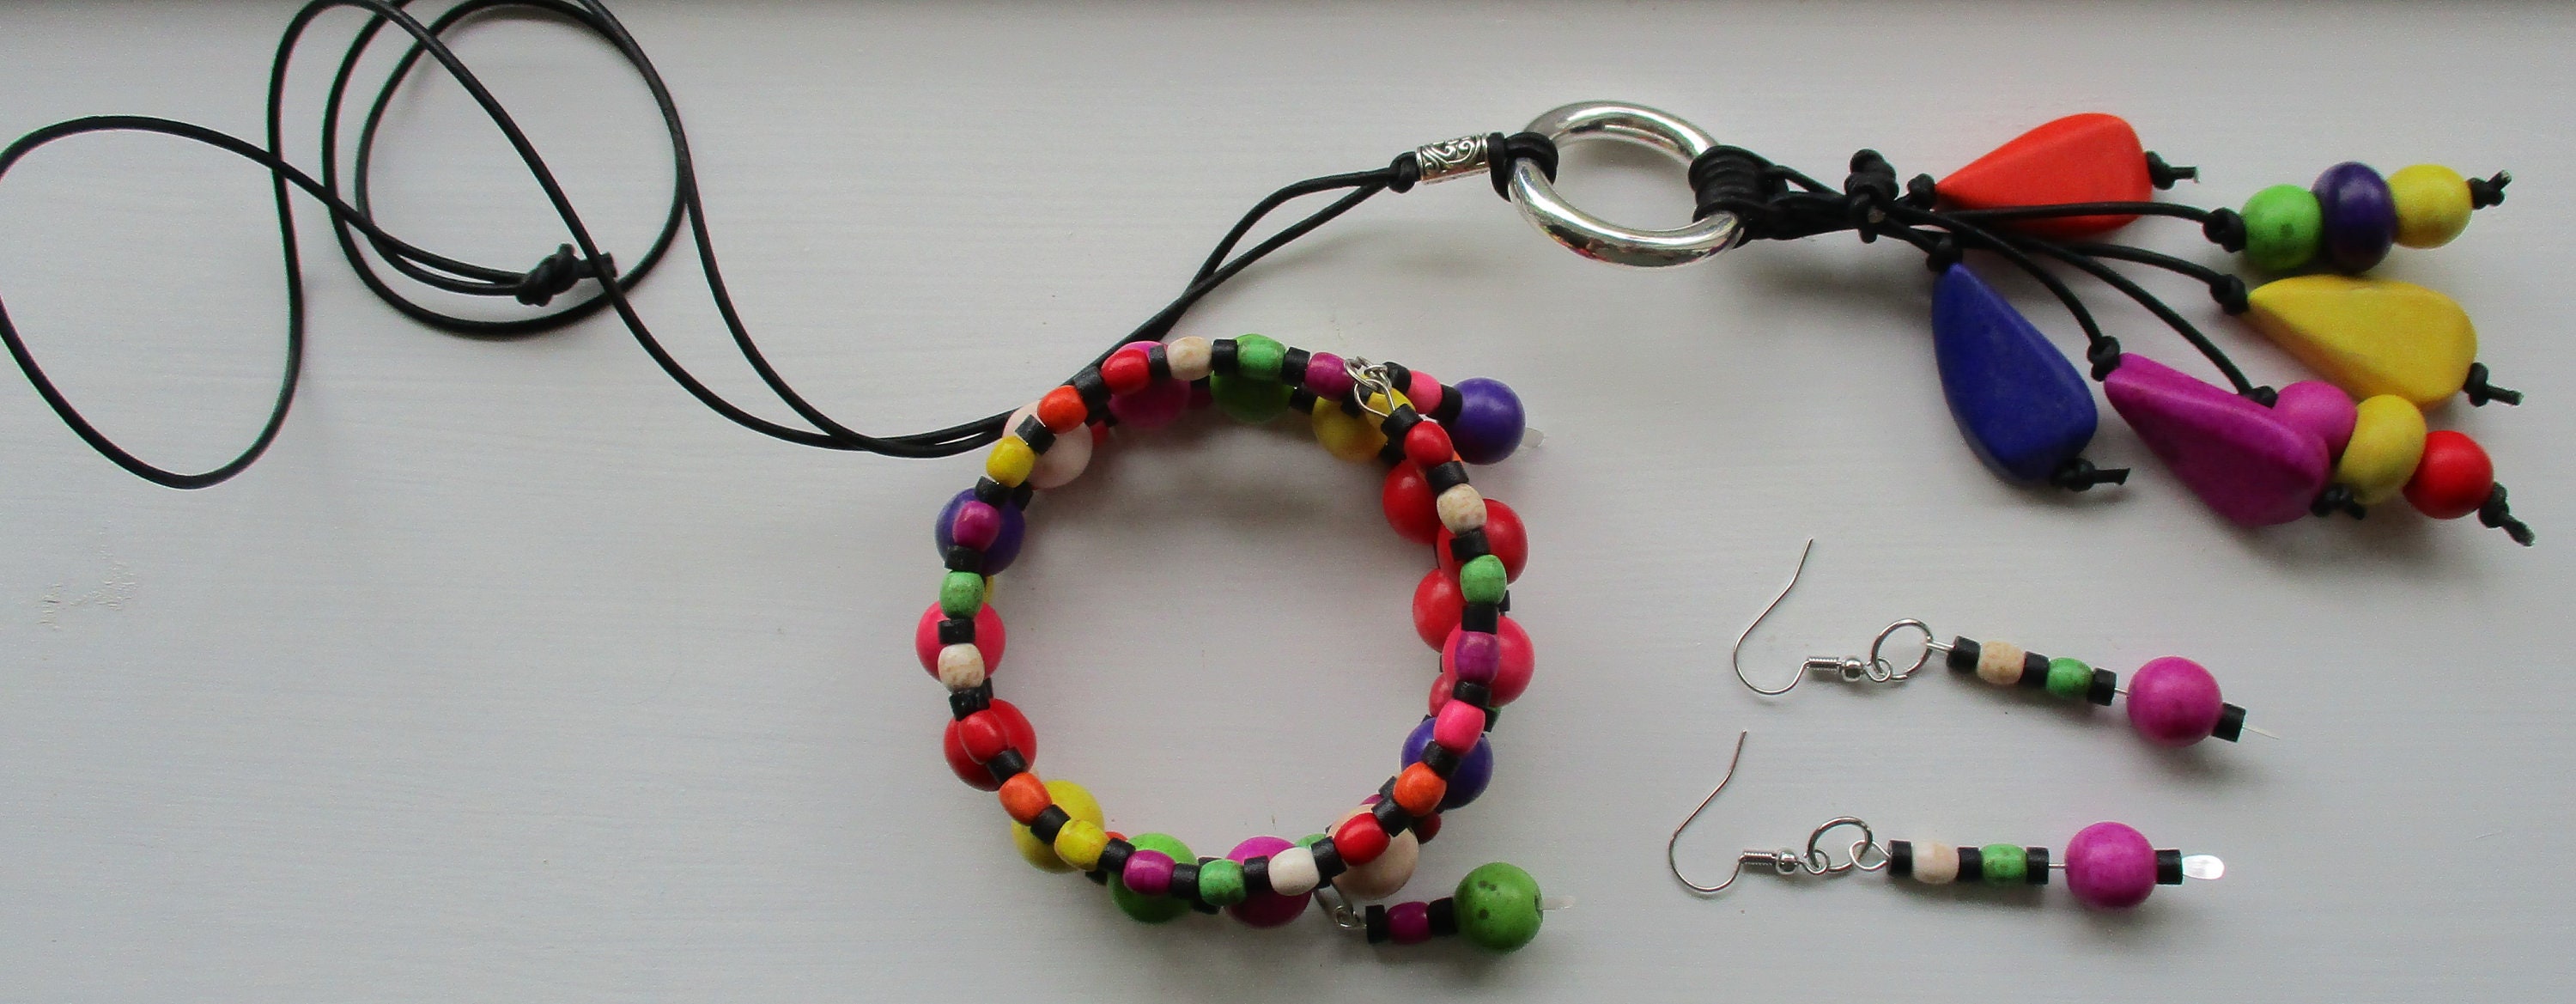 Colorful and so Much Fun...necklace Bracelet and Earrings - Etsy